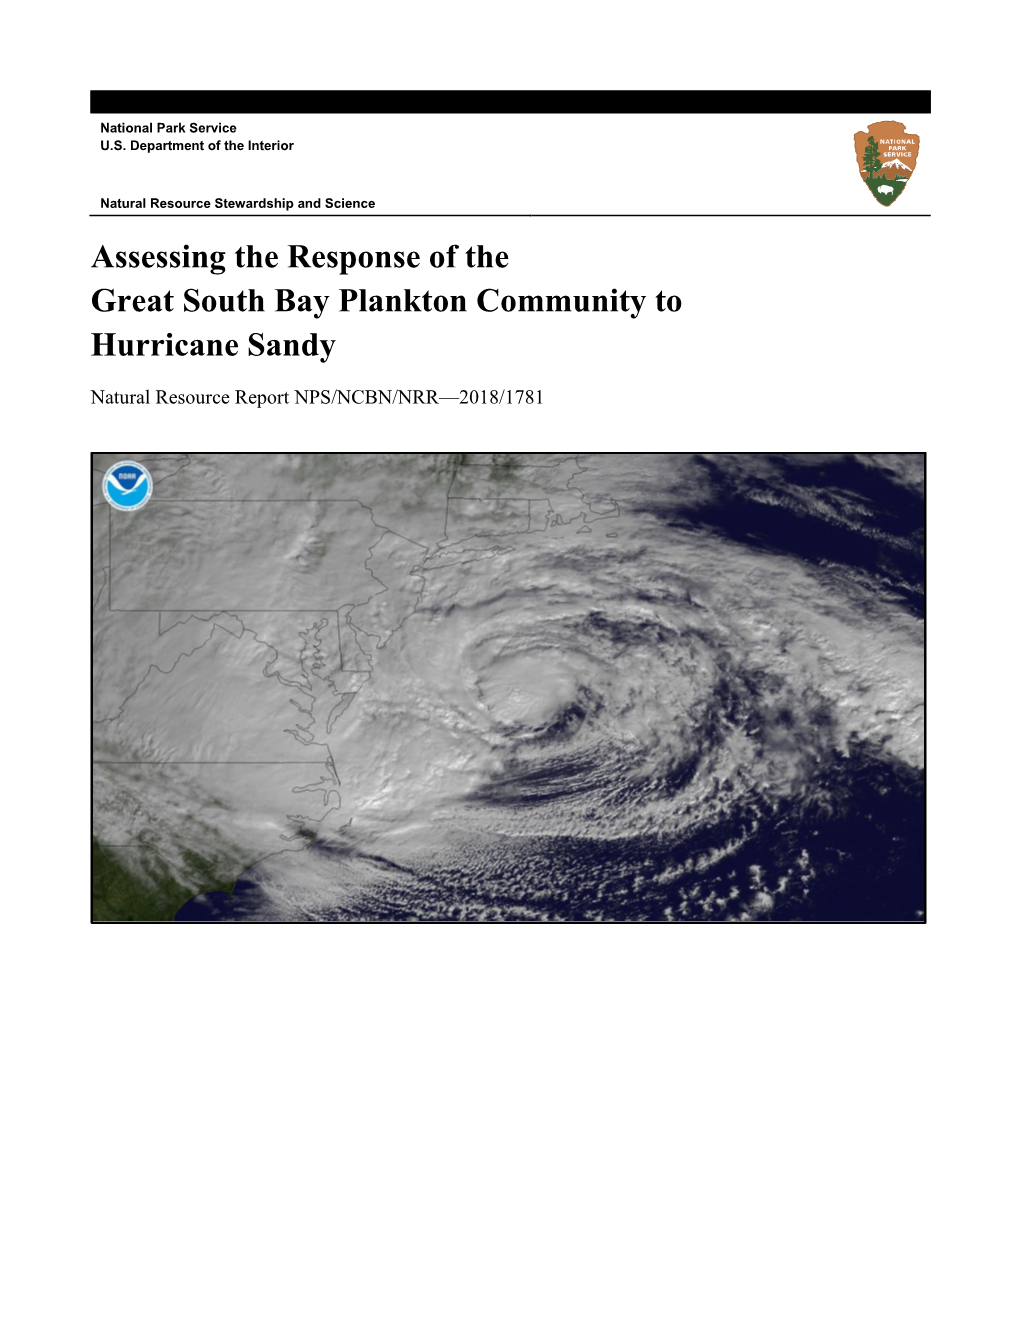 Assessing the Response of the Great South Bay Plankton Community to Hurricane Sandy